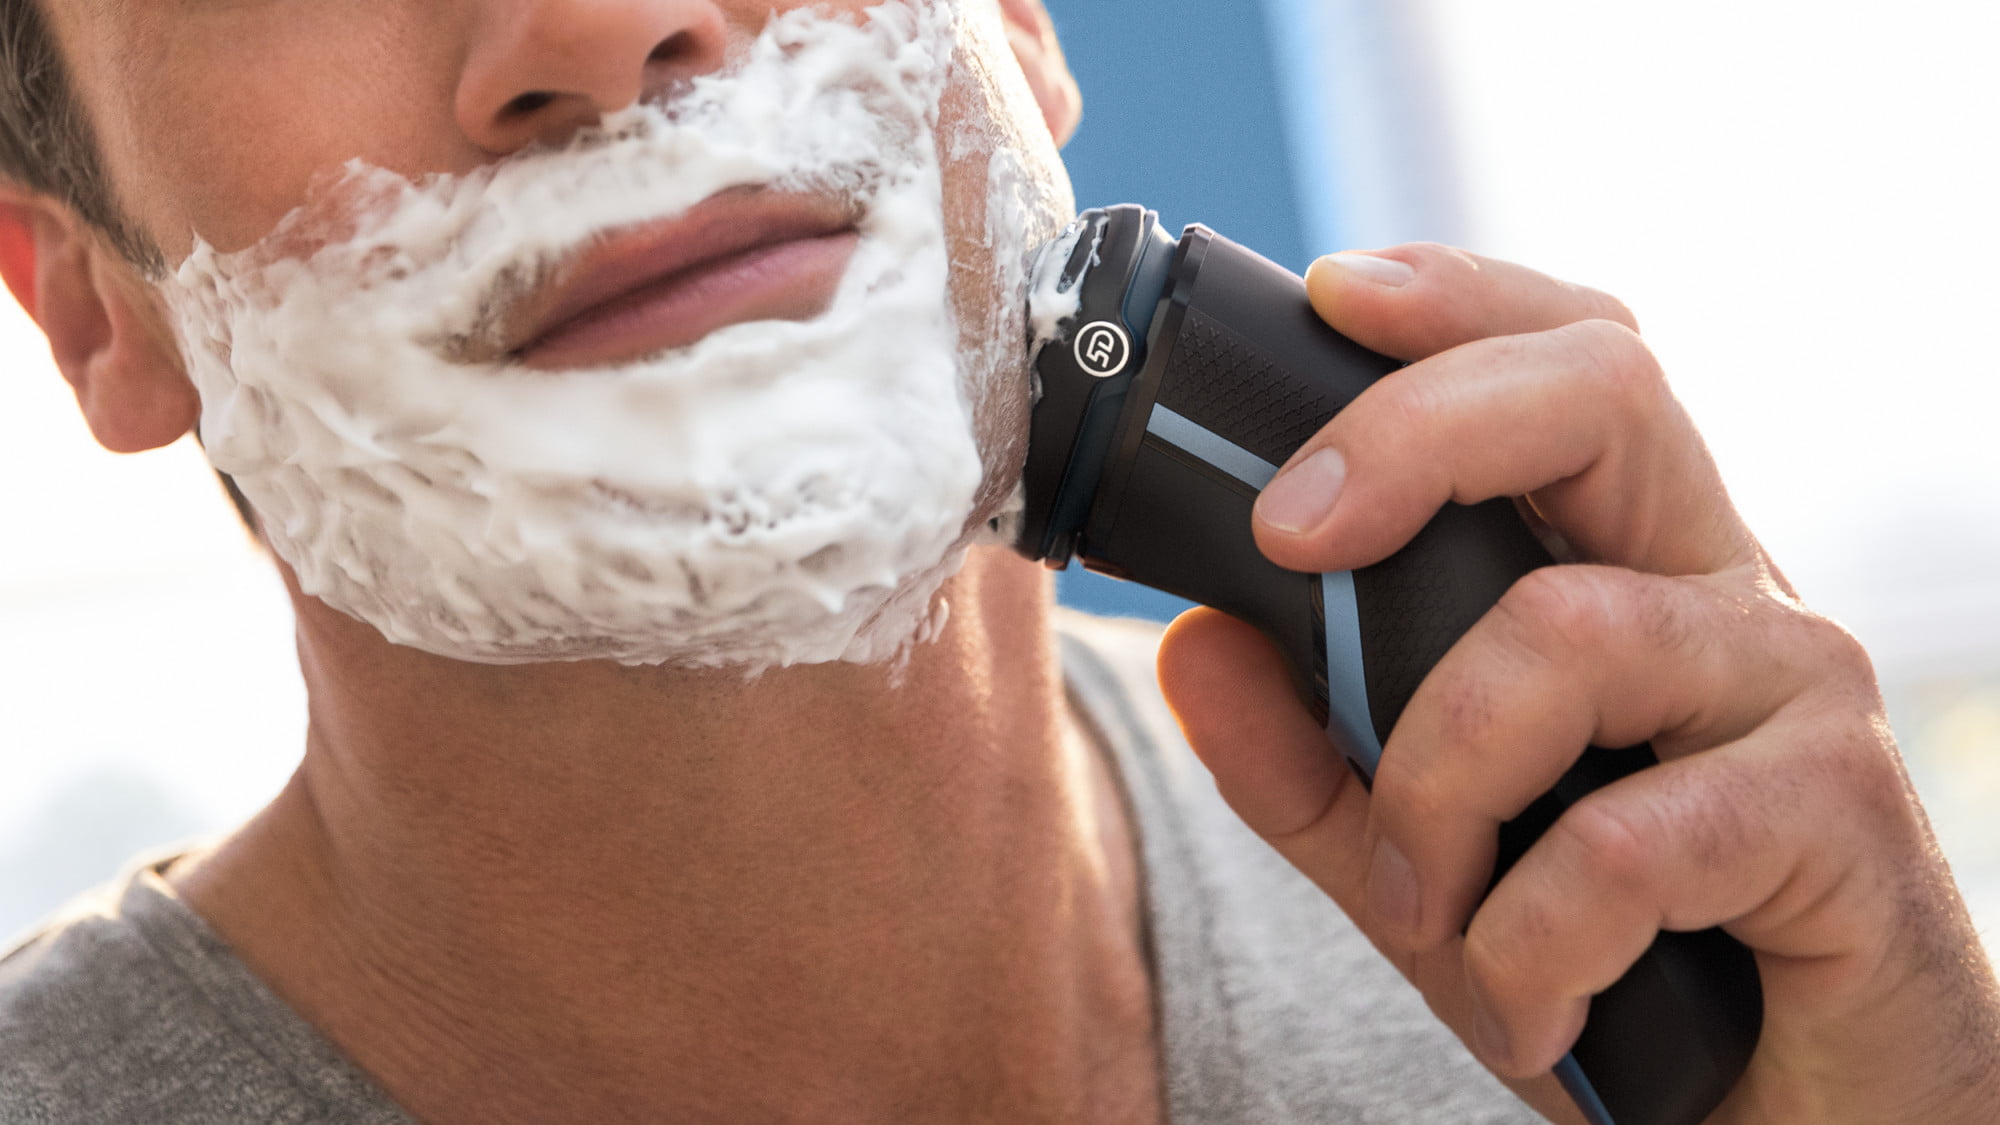 Philips Norelco Shaver with Pop-Up Trimmer